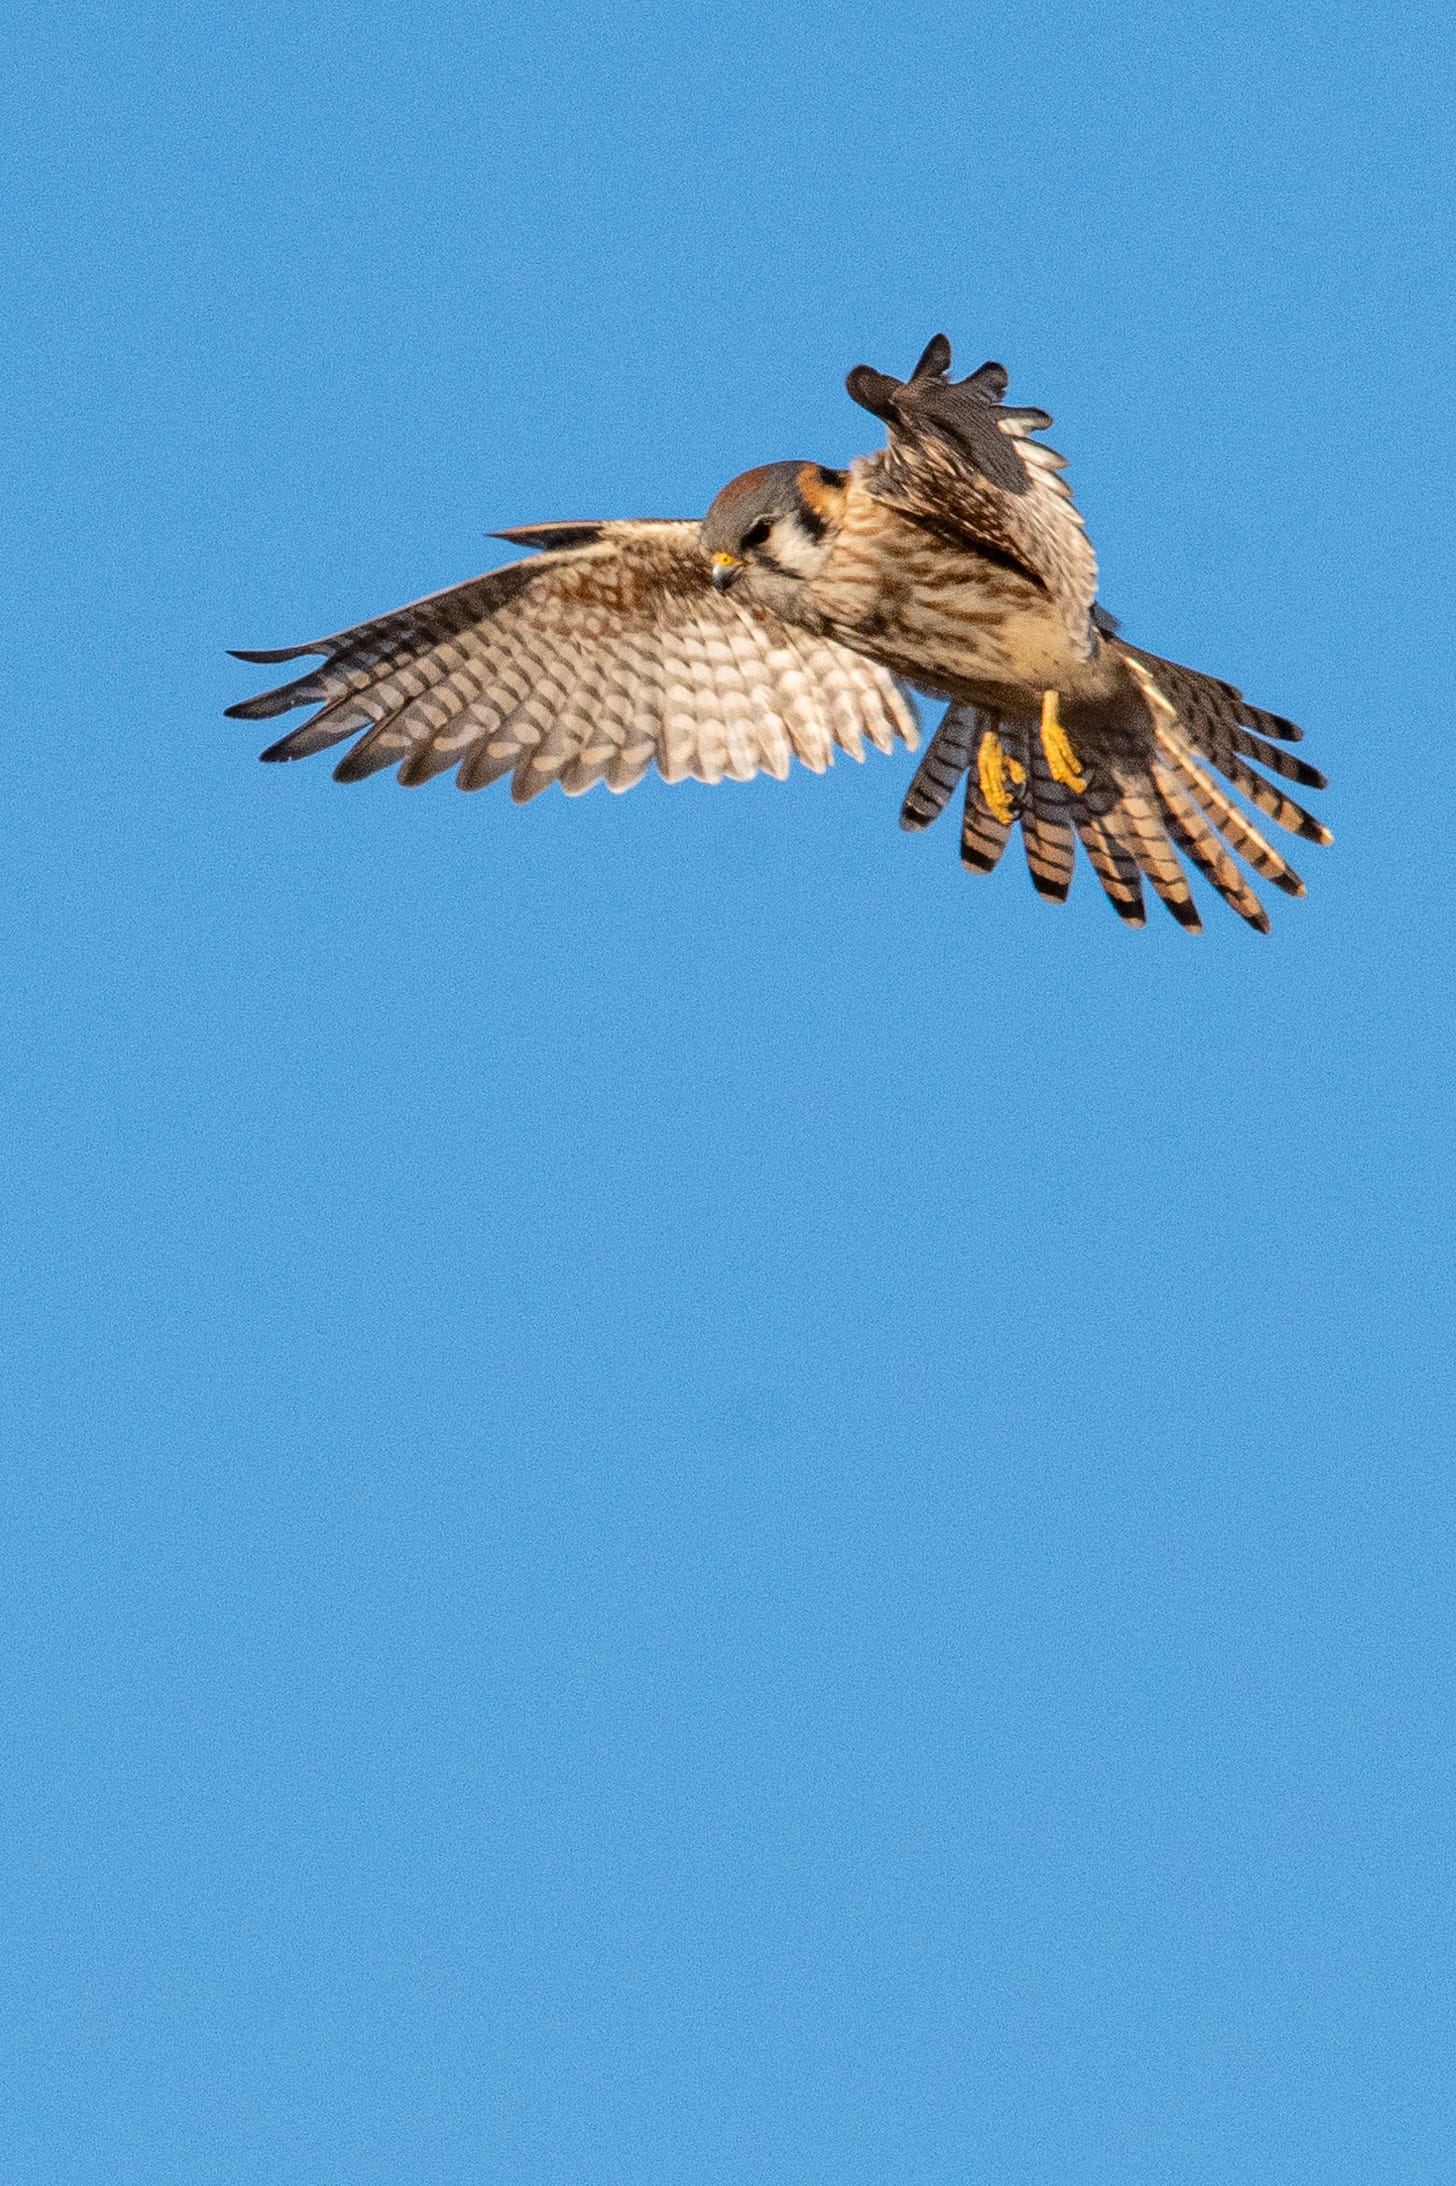 An American kestrel kiting (fluttering in one place in the air as it scans the field below for prey)